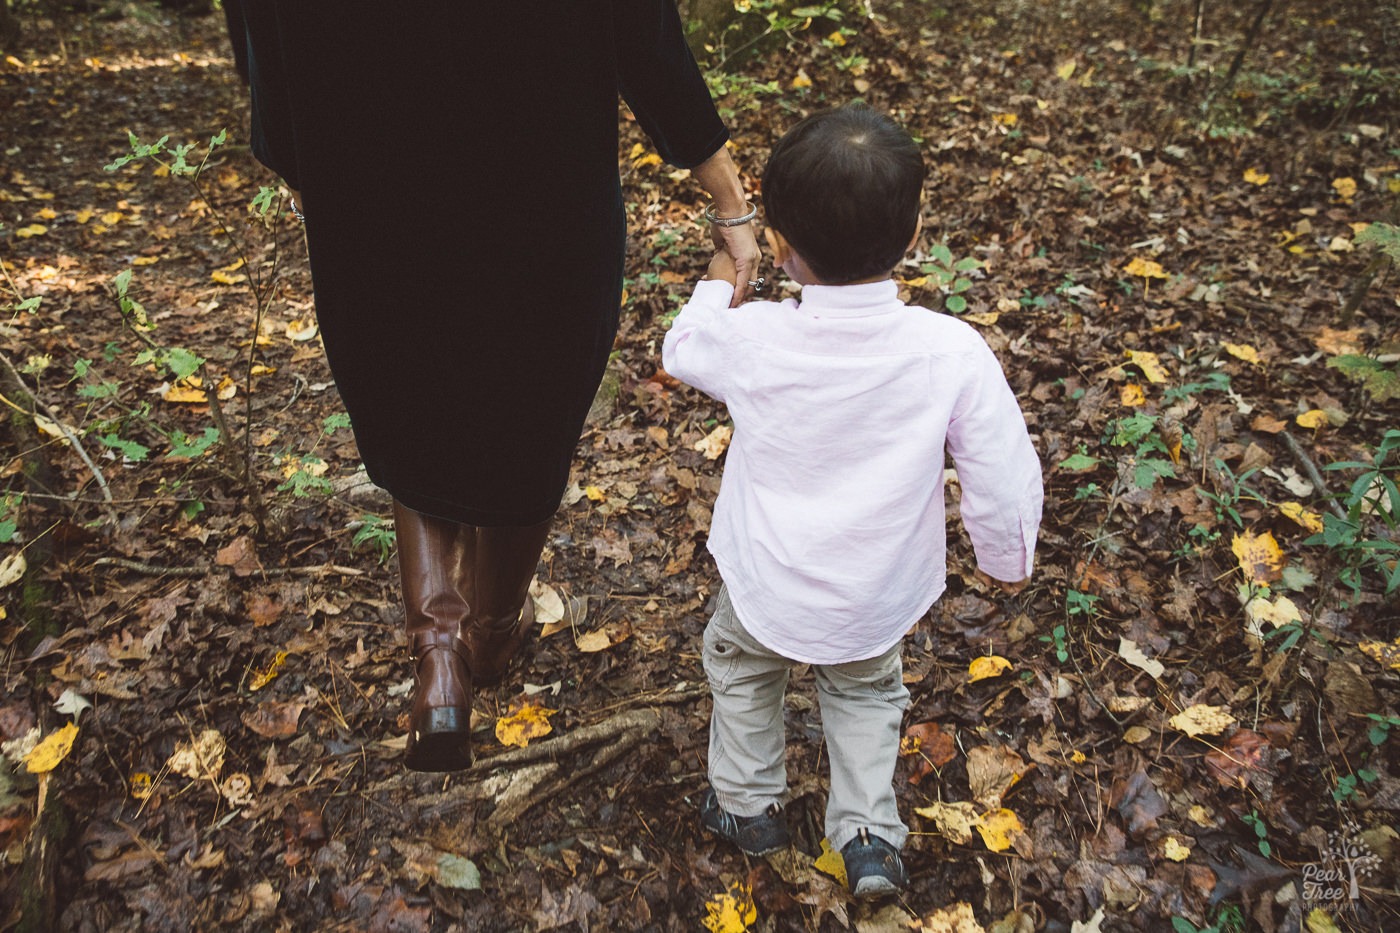 Mom holding her little boy's hand as they walk through the woods with autumn leaves on the ground.